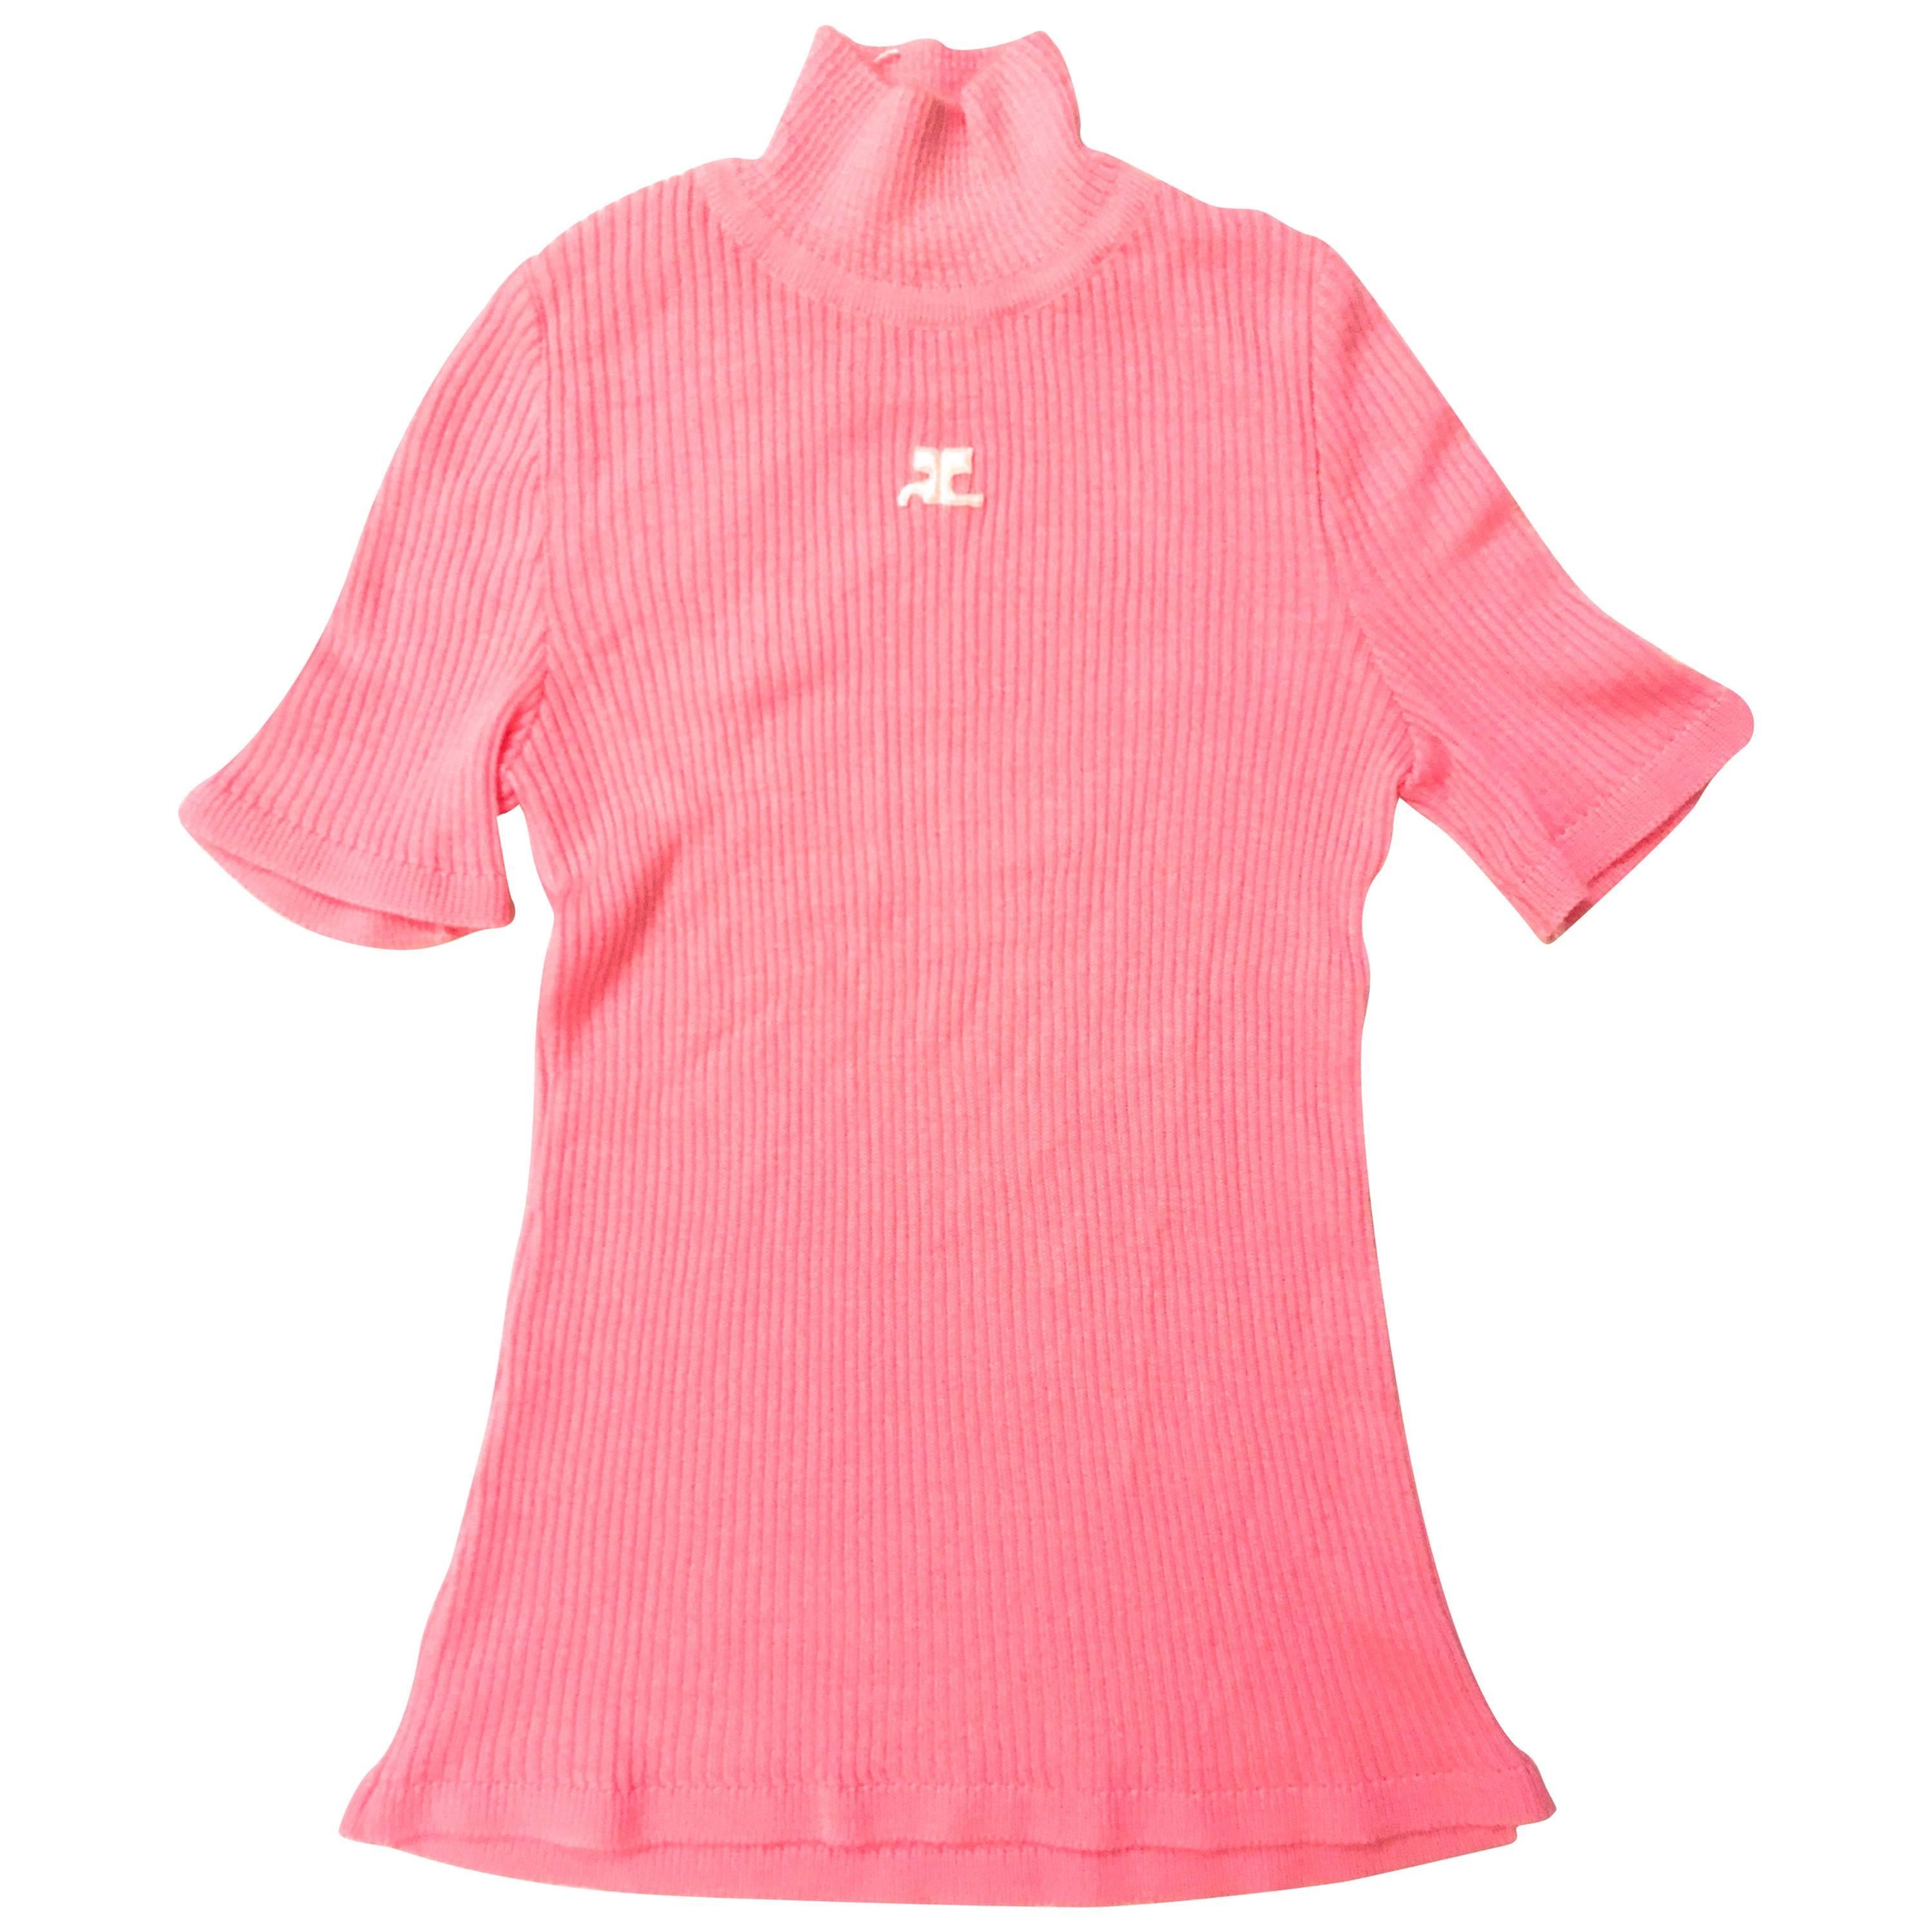 Courreges Sweater - Short Sleeve - Pink - 1970's - Mint Condition For Sale